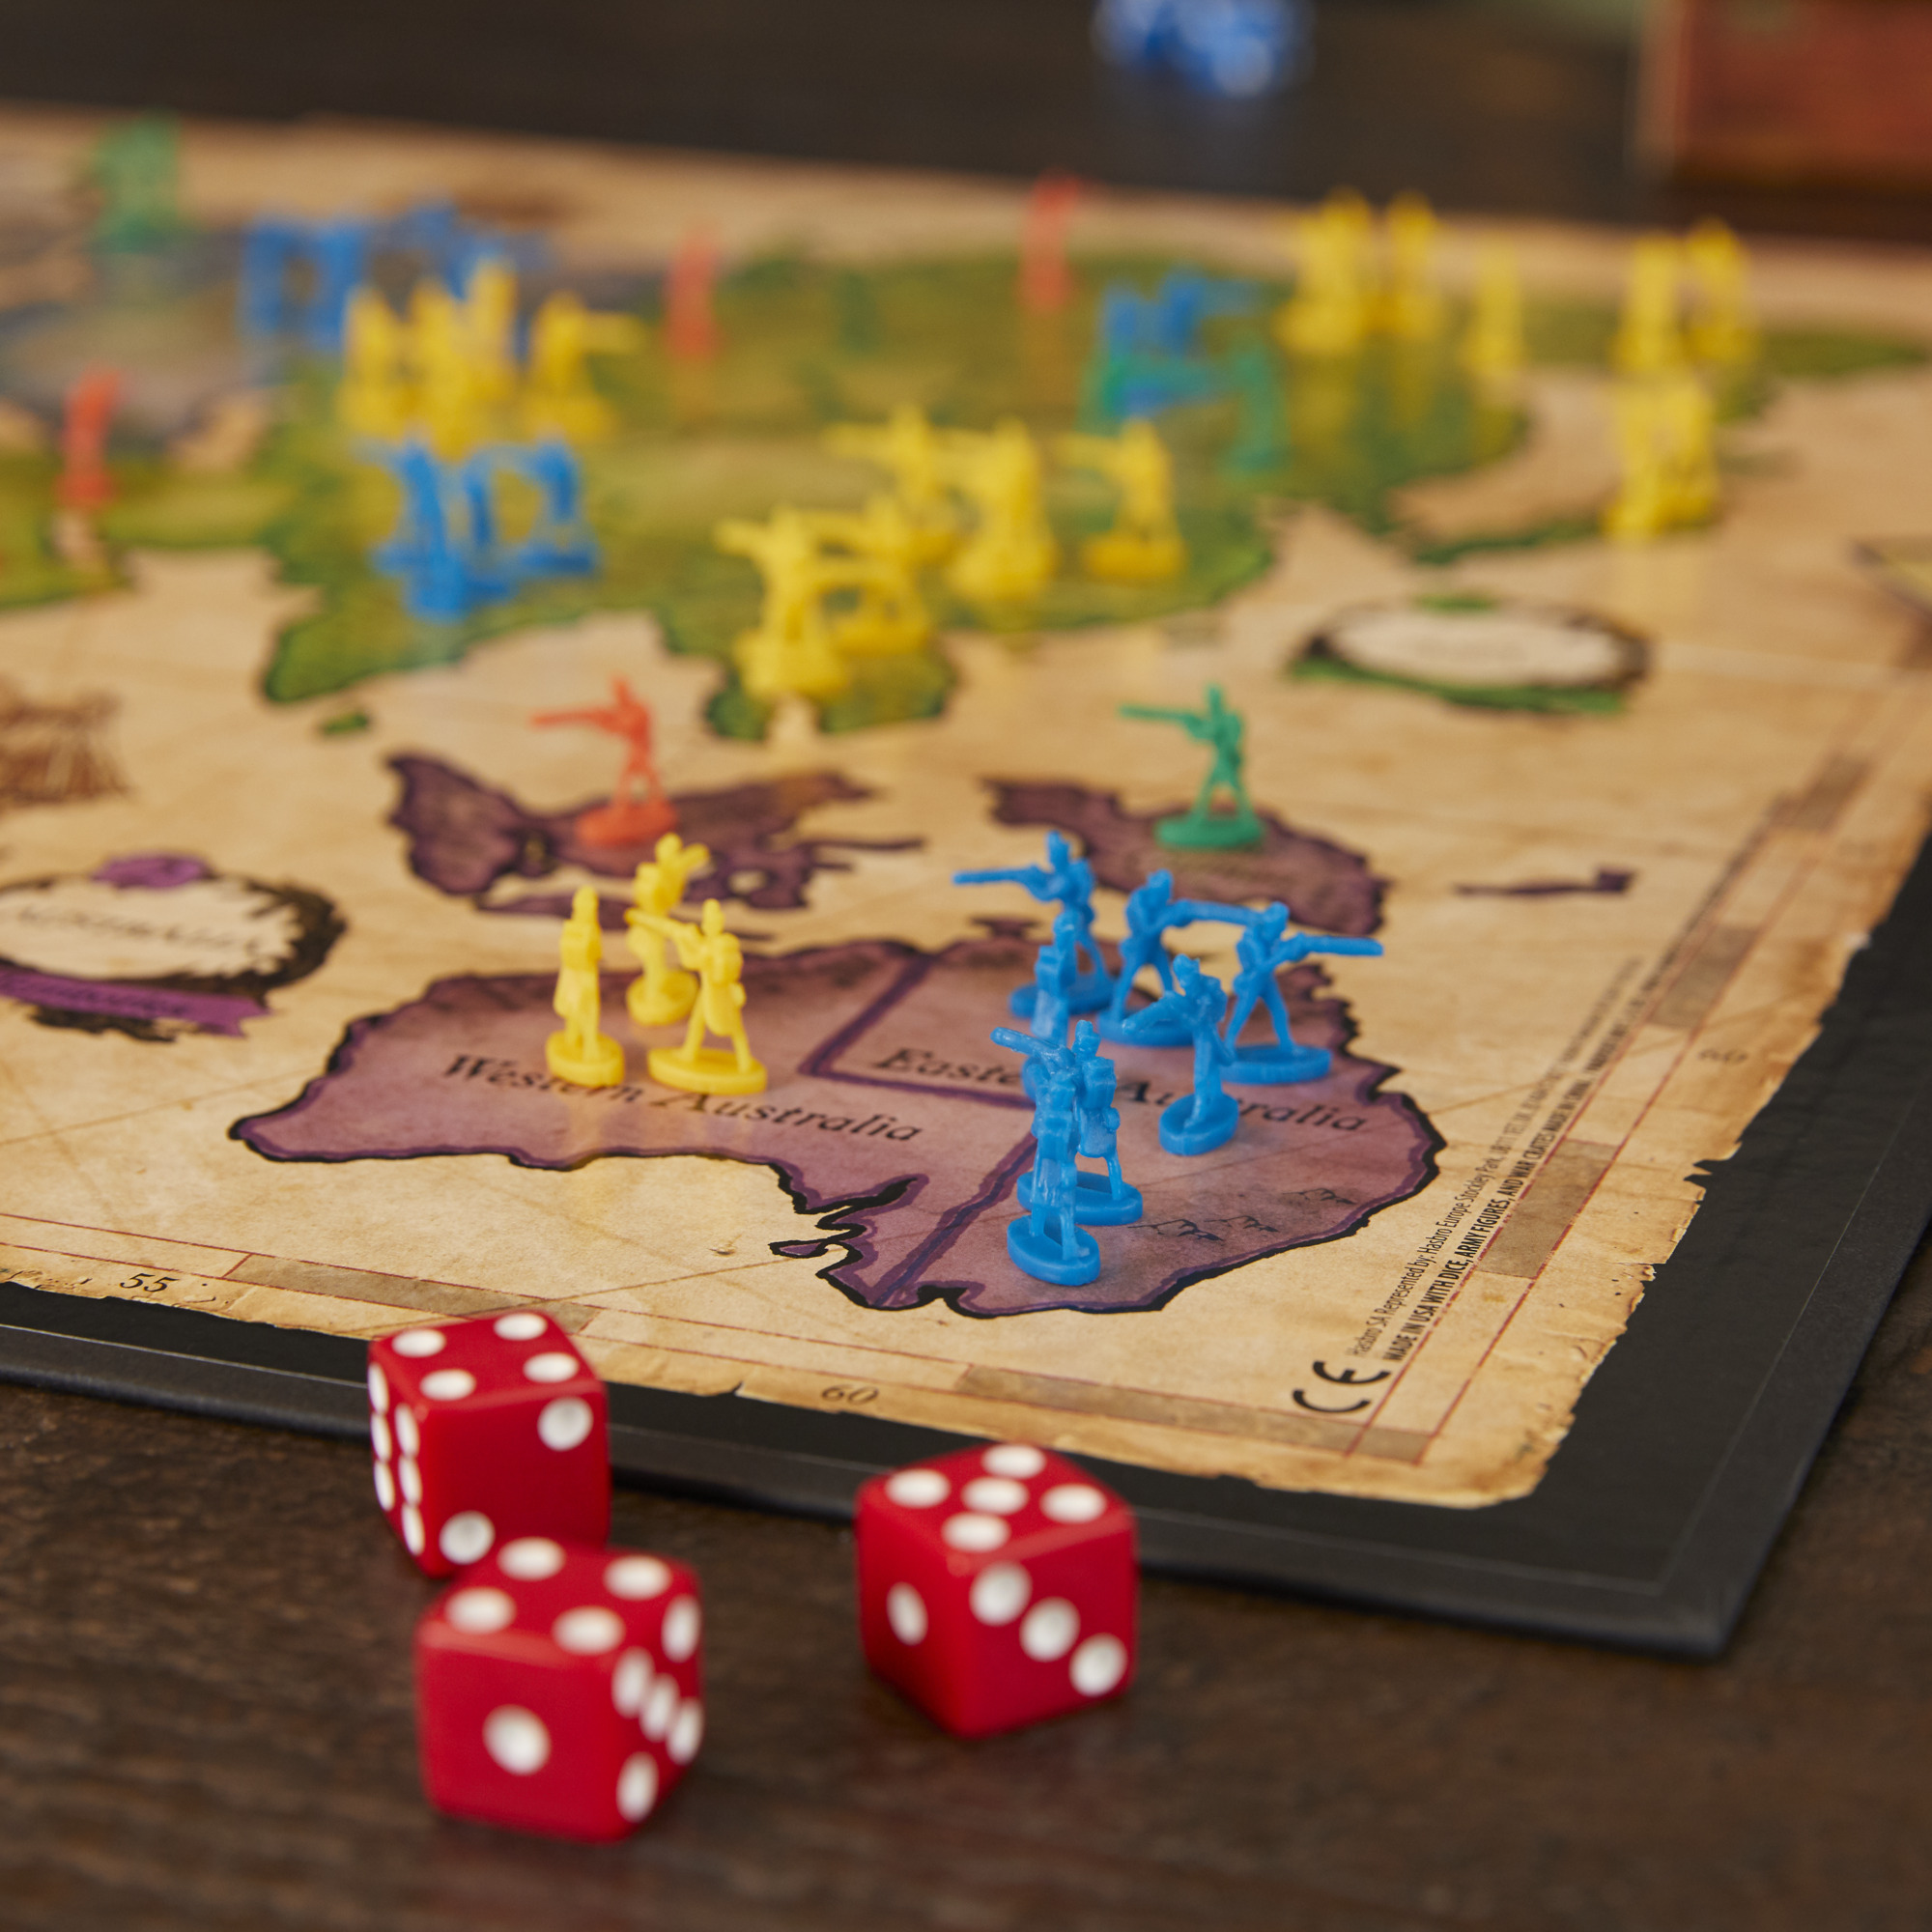 Risk The Game Of Strategy Conquest Board Game for Kids and Family Ages 10 and Up, 2-5 Players - image 5 of 12